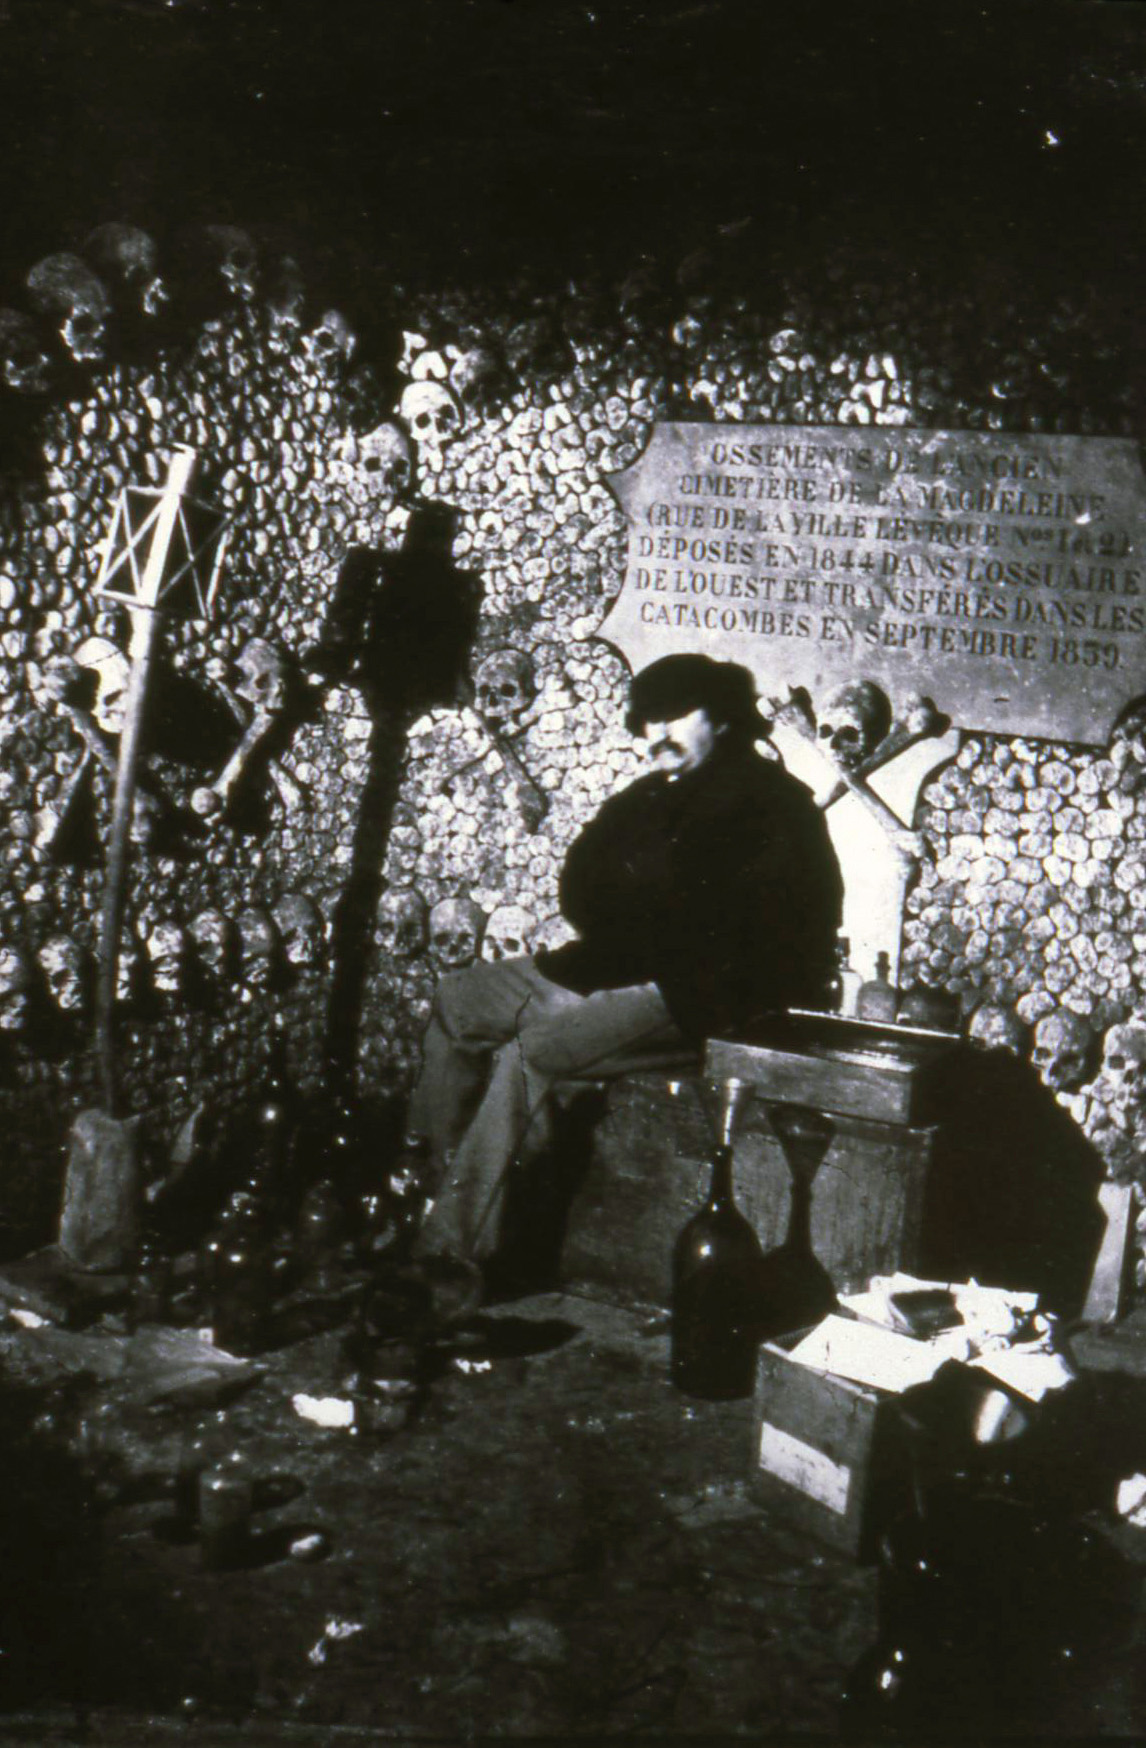 Self-portrait of Nadar in the Catacombs